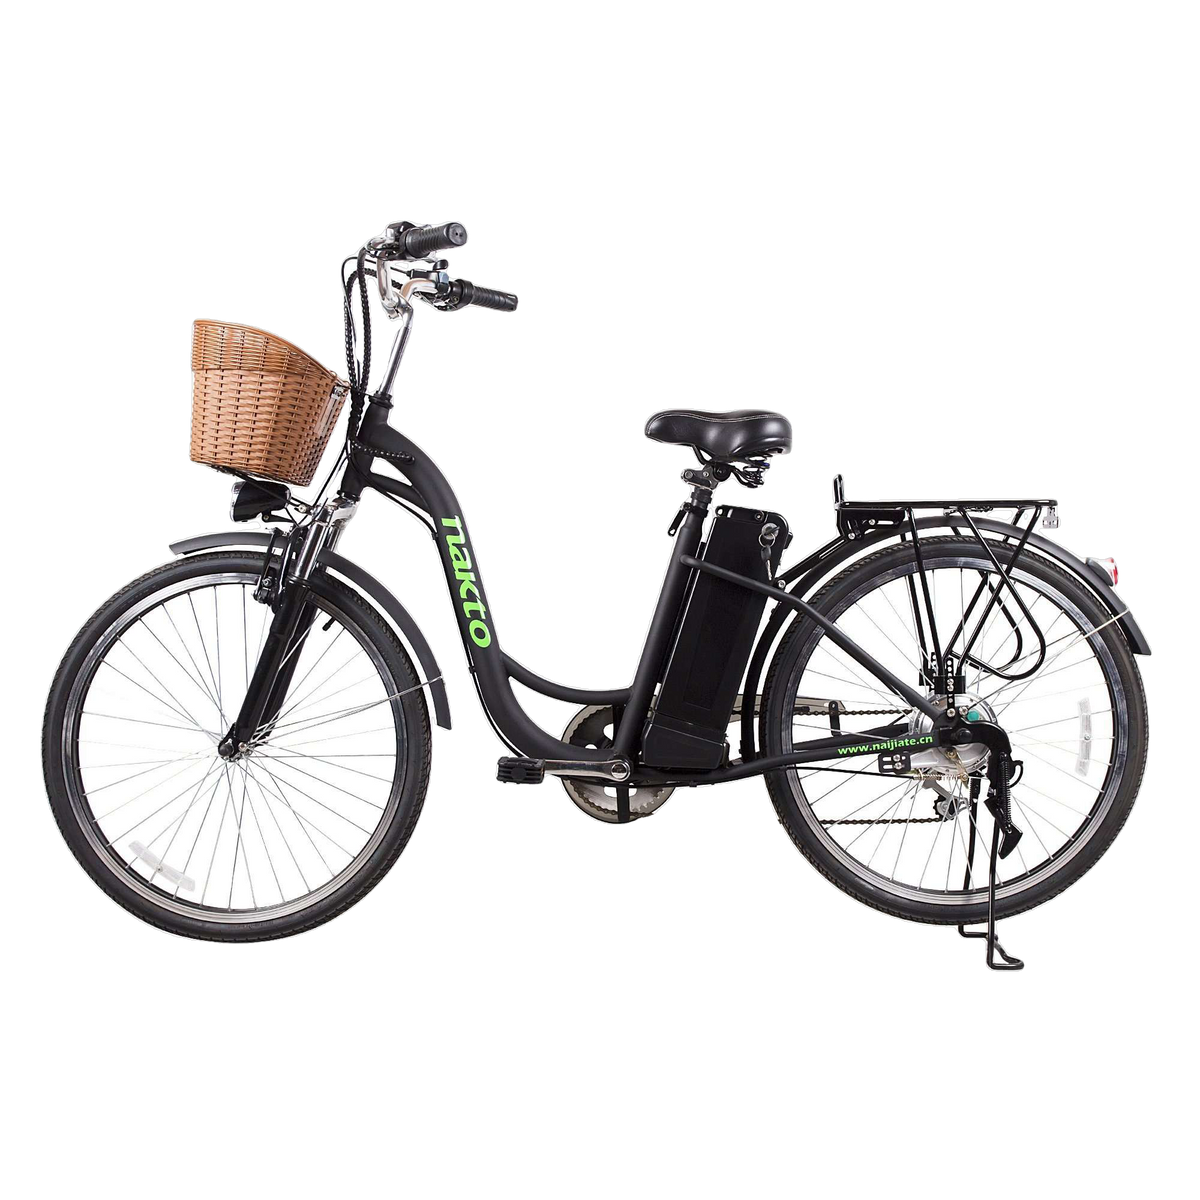 NAKTO 26 inch 250W 19 MPH Camel Electric Bicycle 6 Speed E-Bike 36V Lithium Battery Female/Young Adult Black New